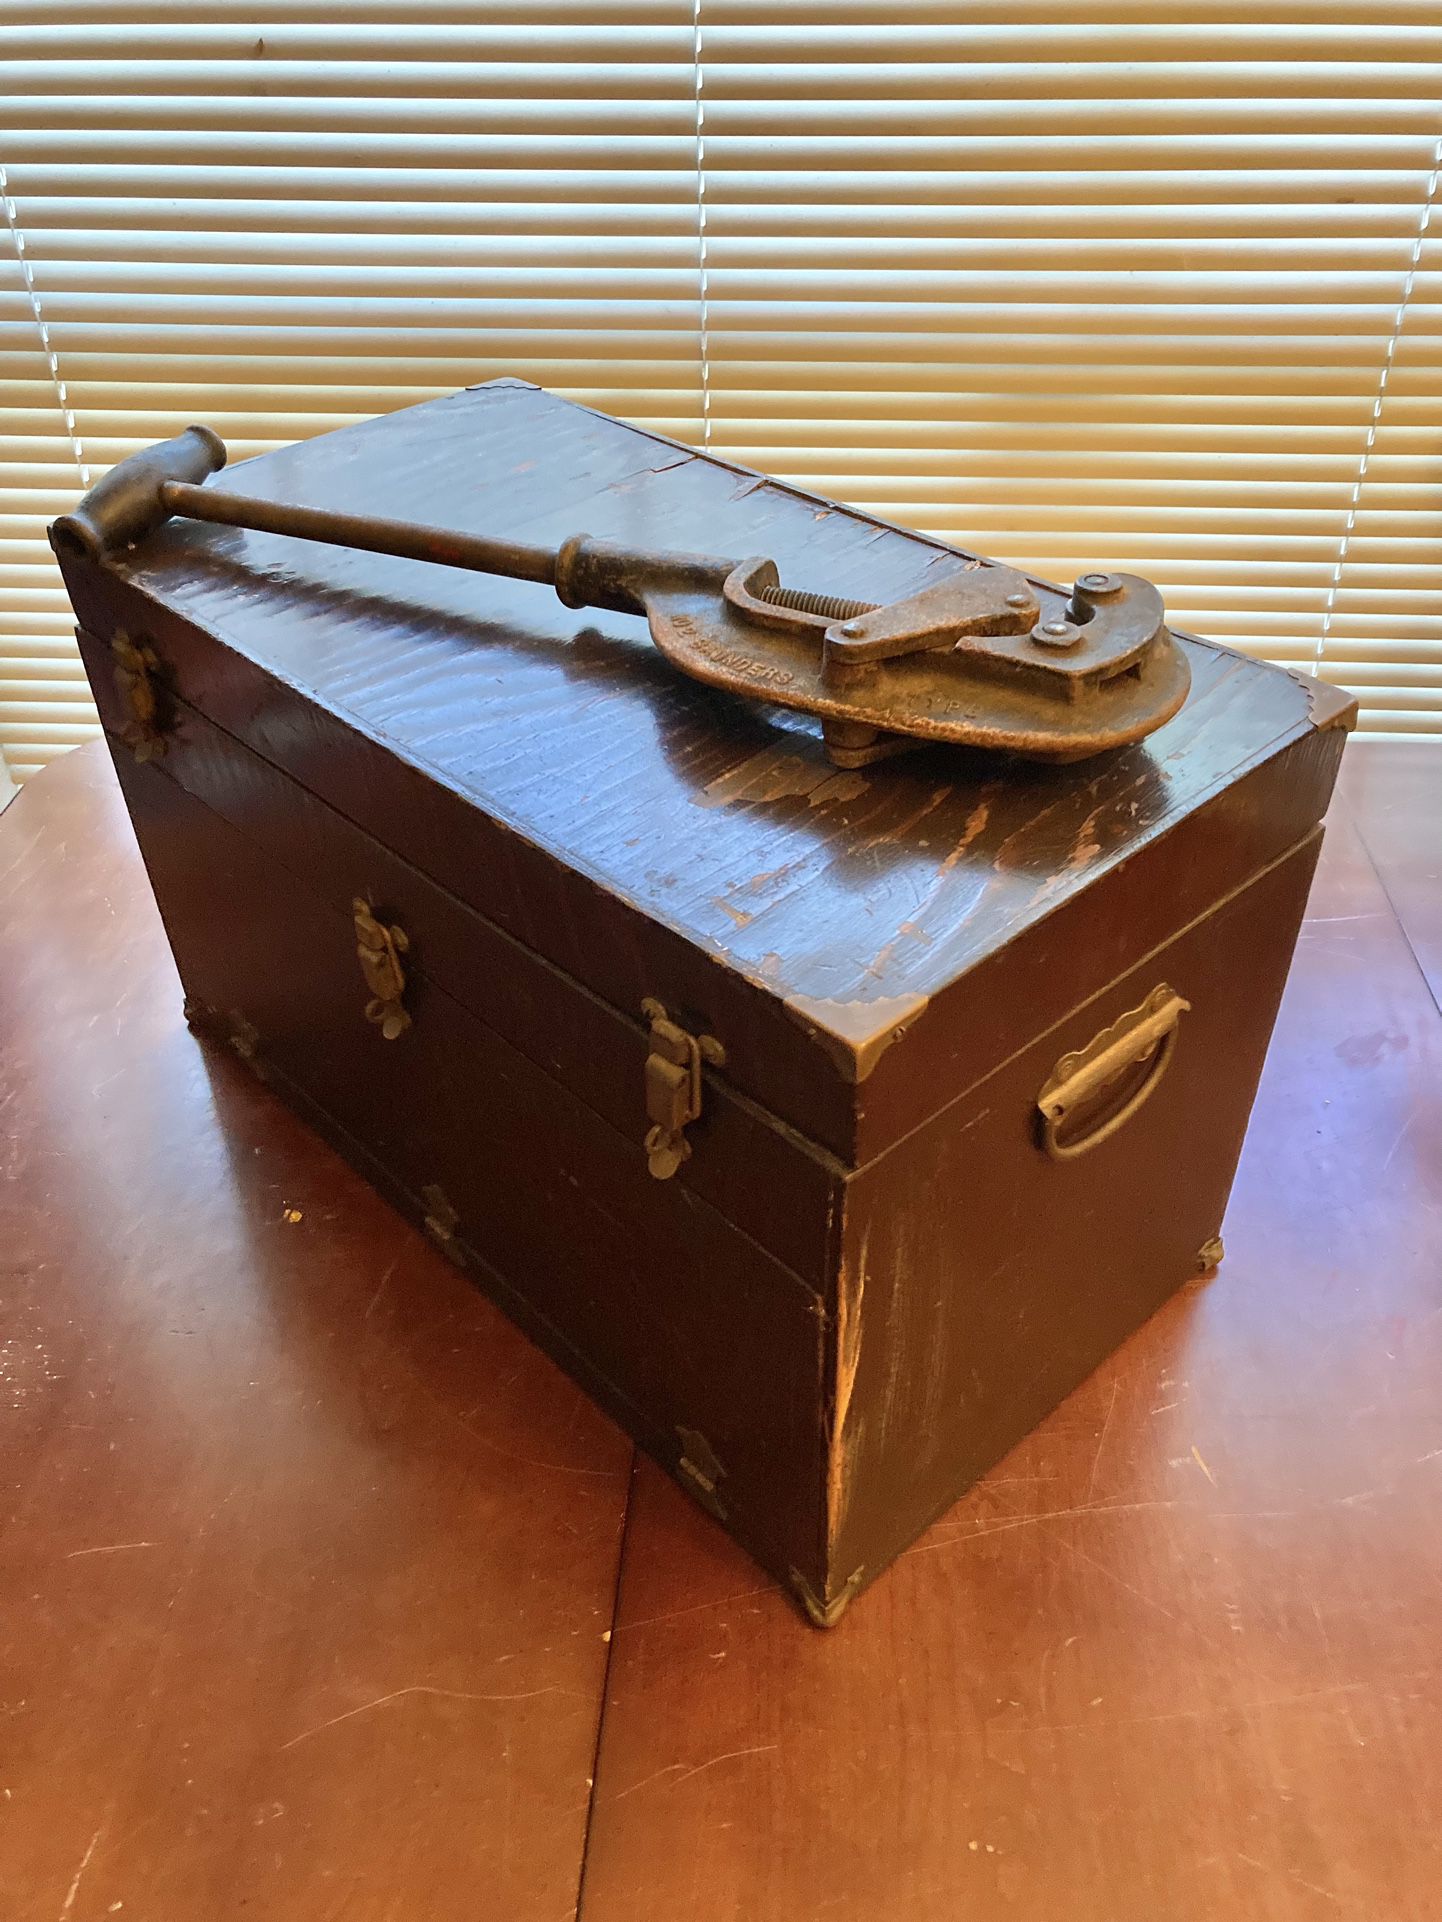 Vintage Tools With Box